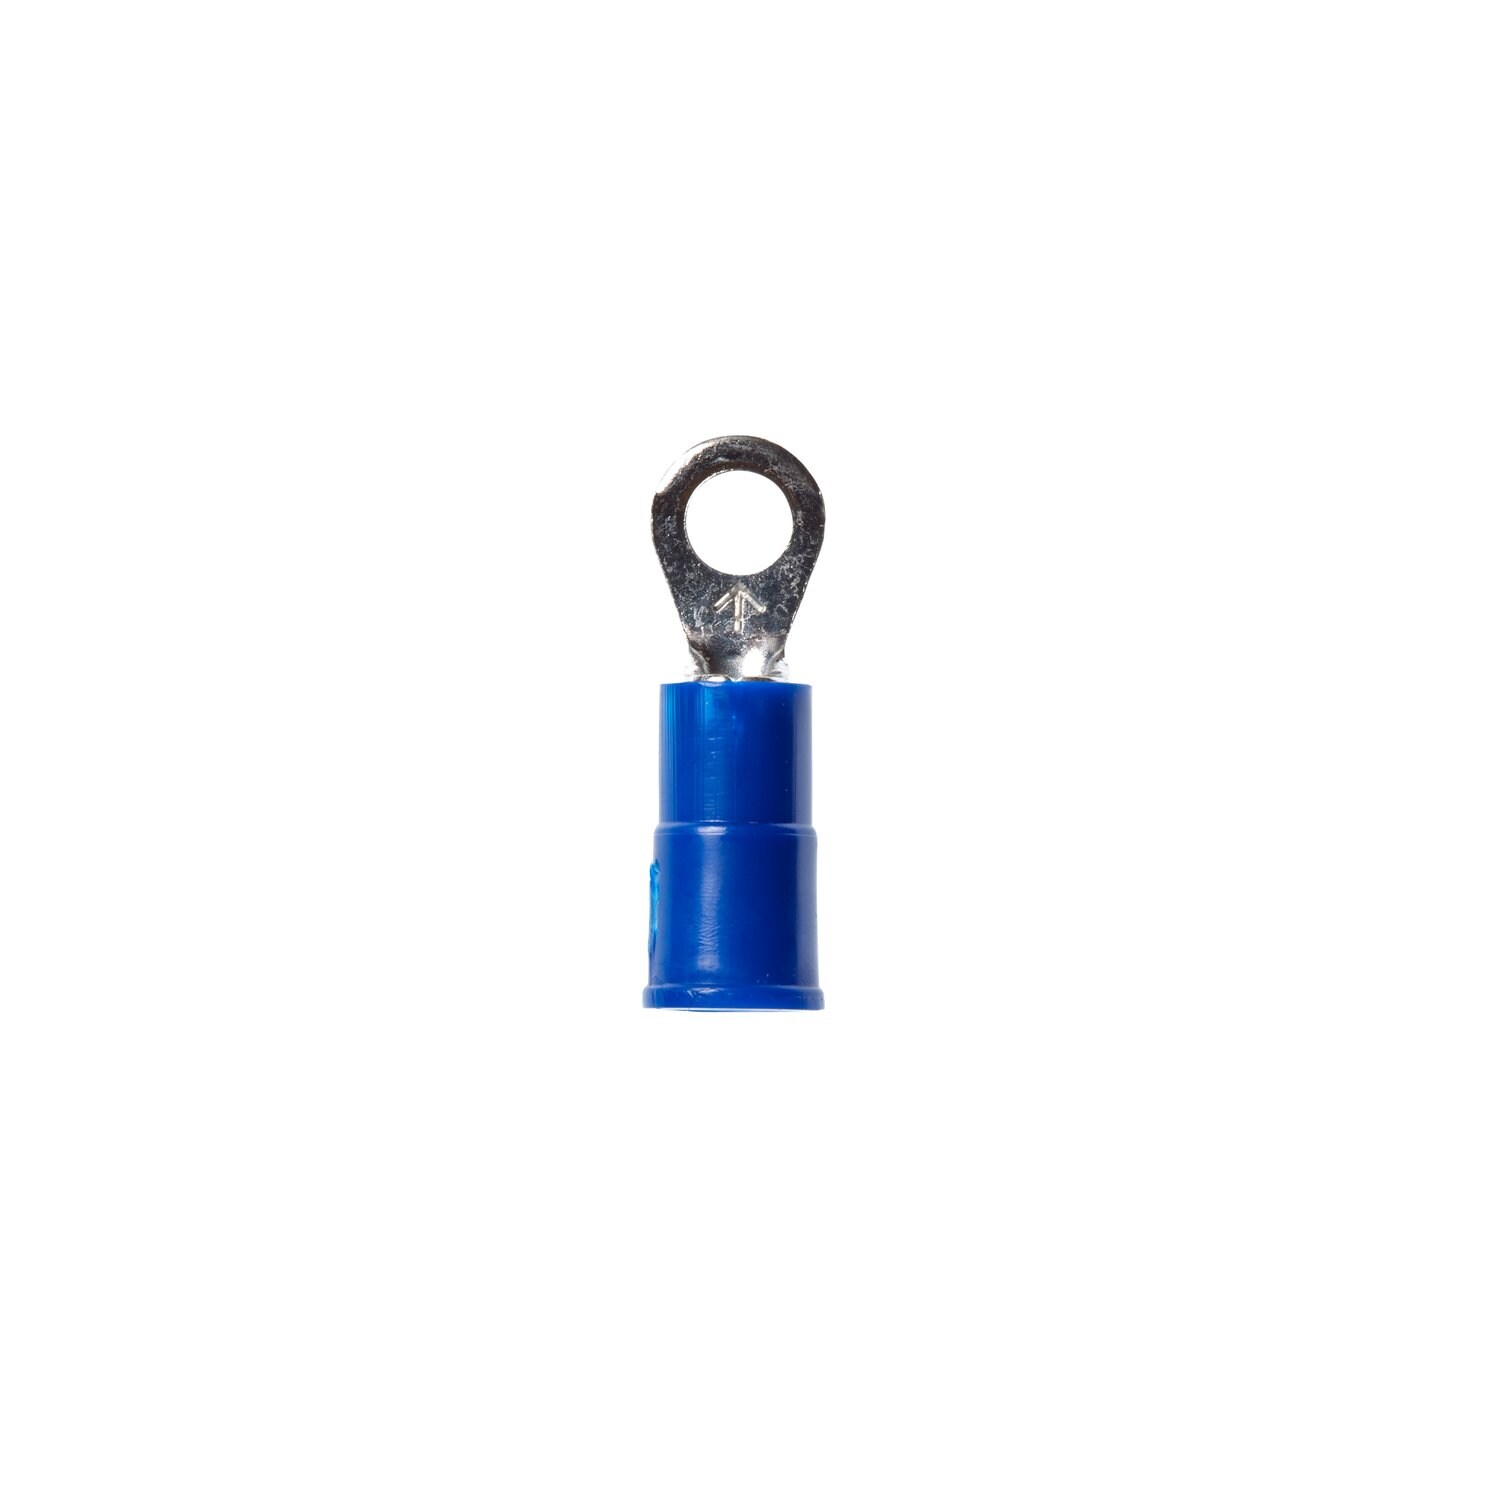 7010398190 - 3M Scotchlok Ring Vinyl Insulated, 100/bottle, MVU14-6R/SX,
standard-style ring tongue fits around the stud, 500/Case